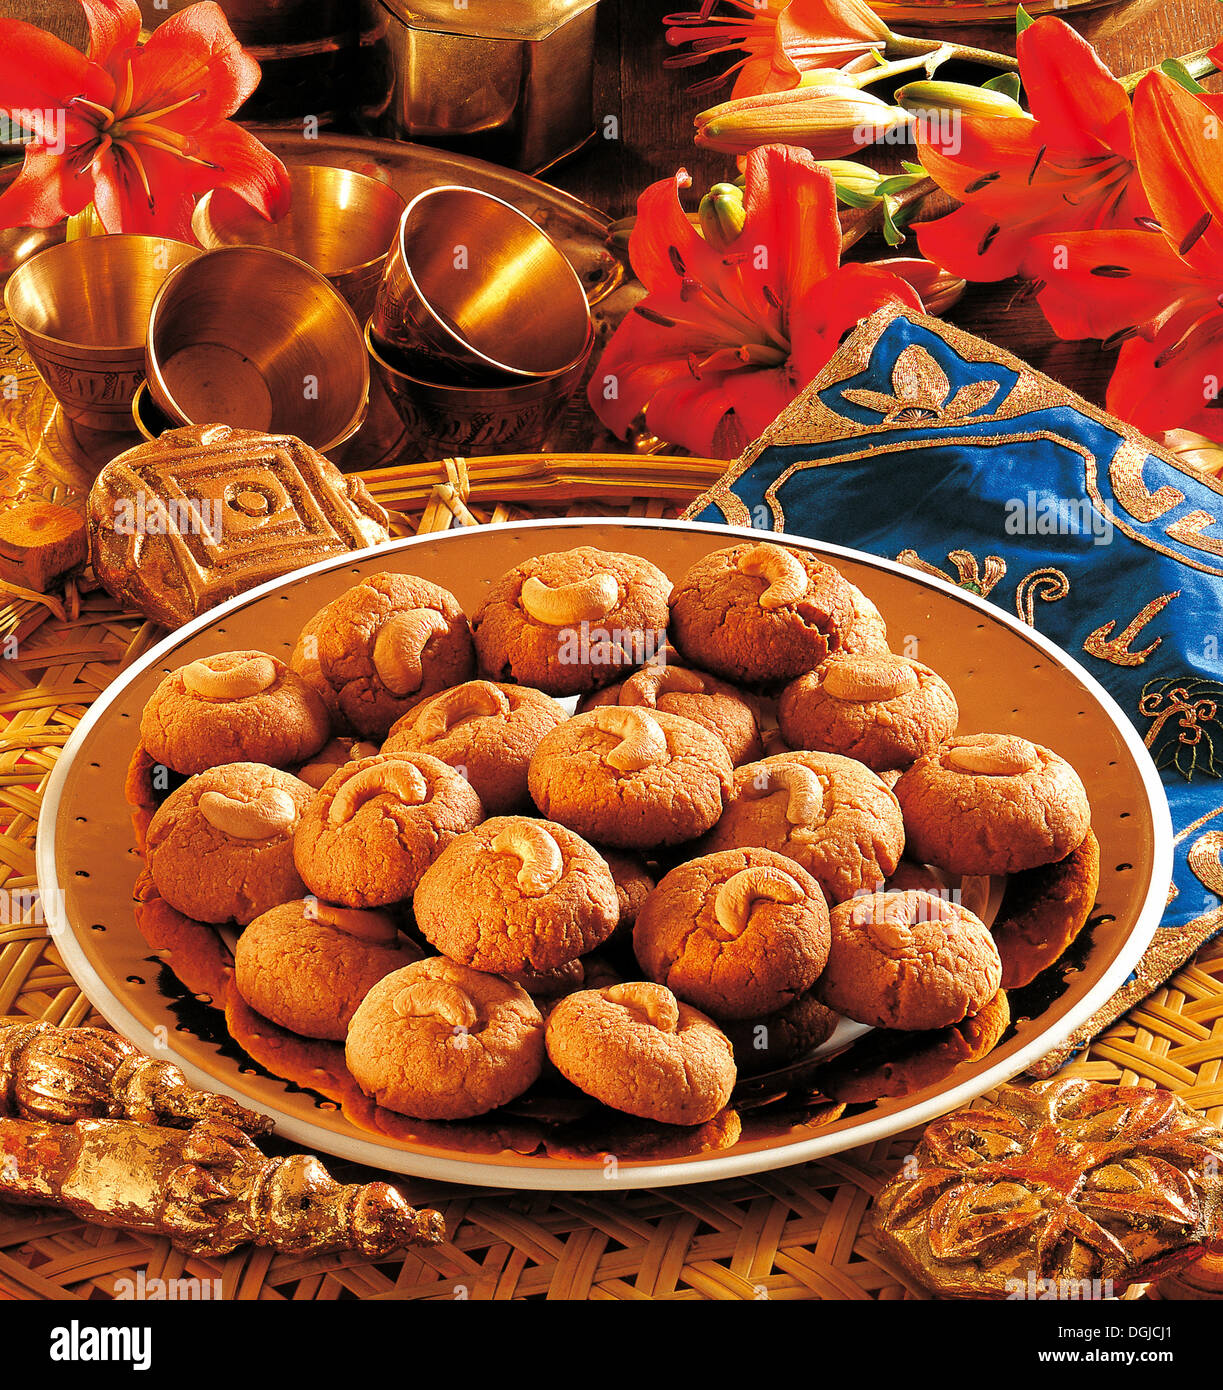 Indian nut biscuits, India. Stock Photo